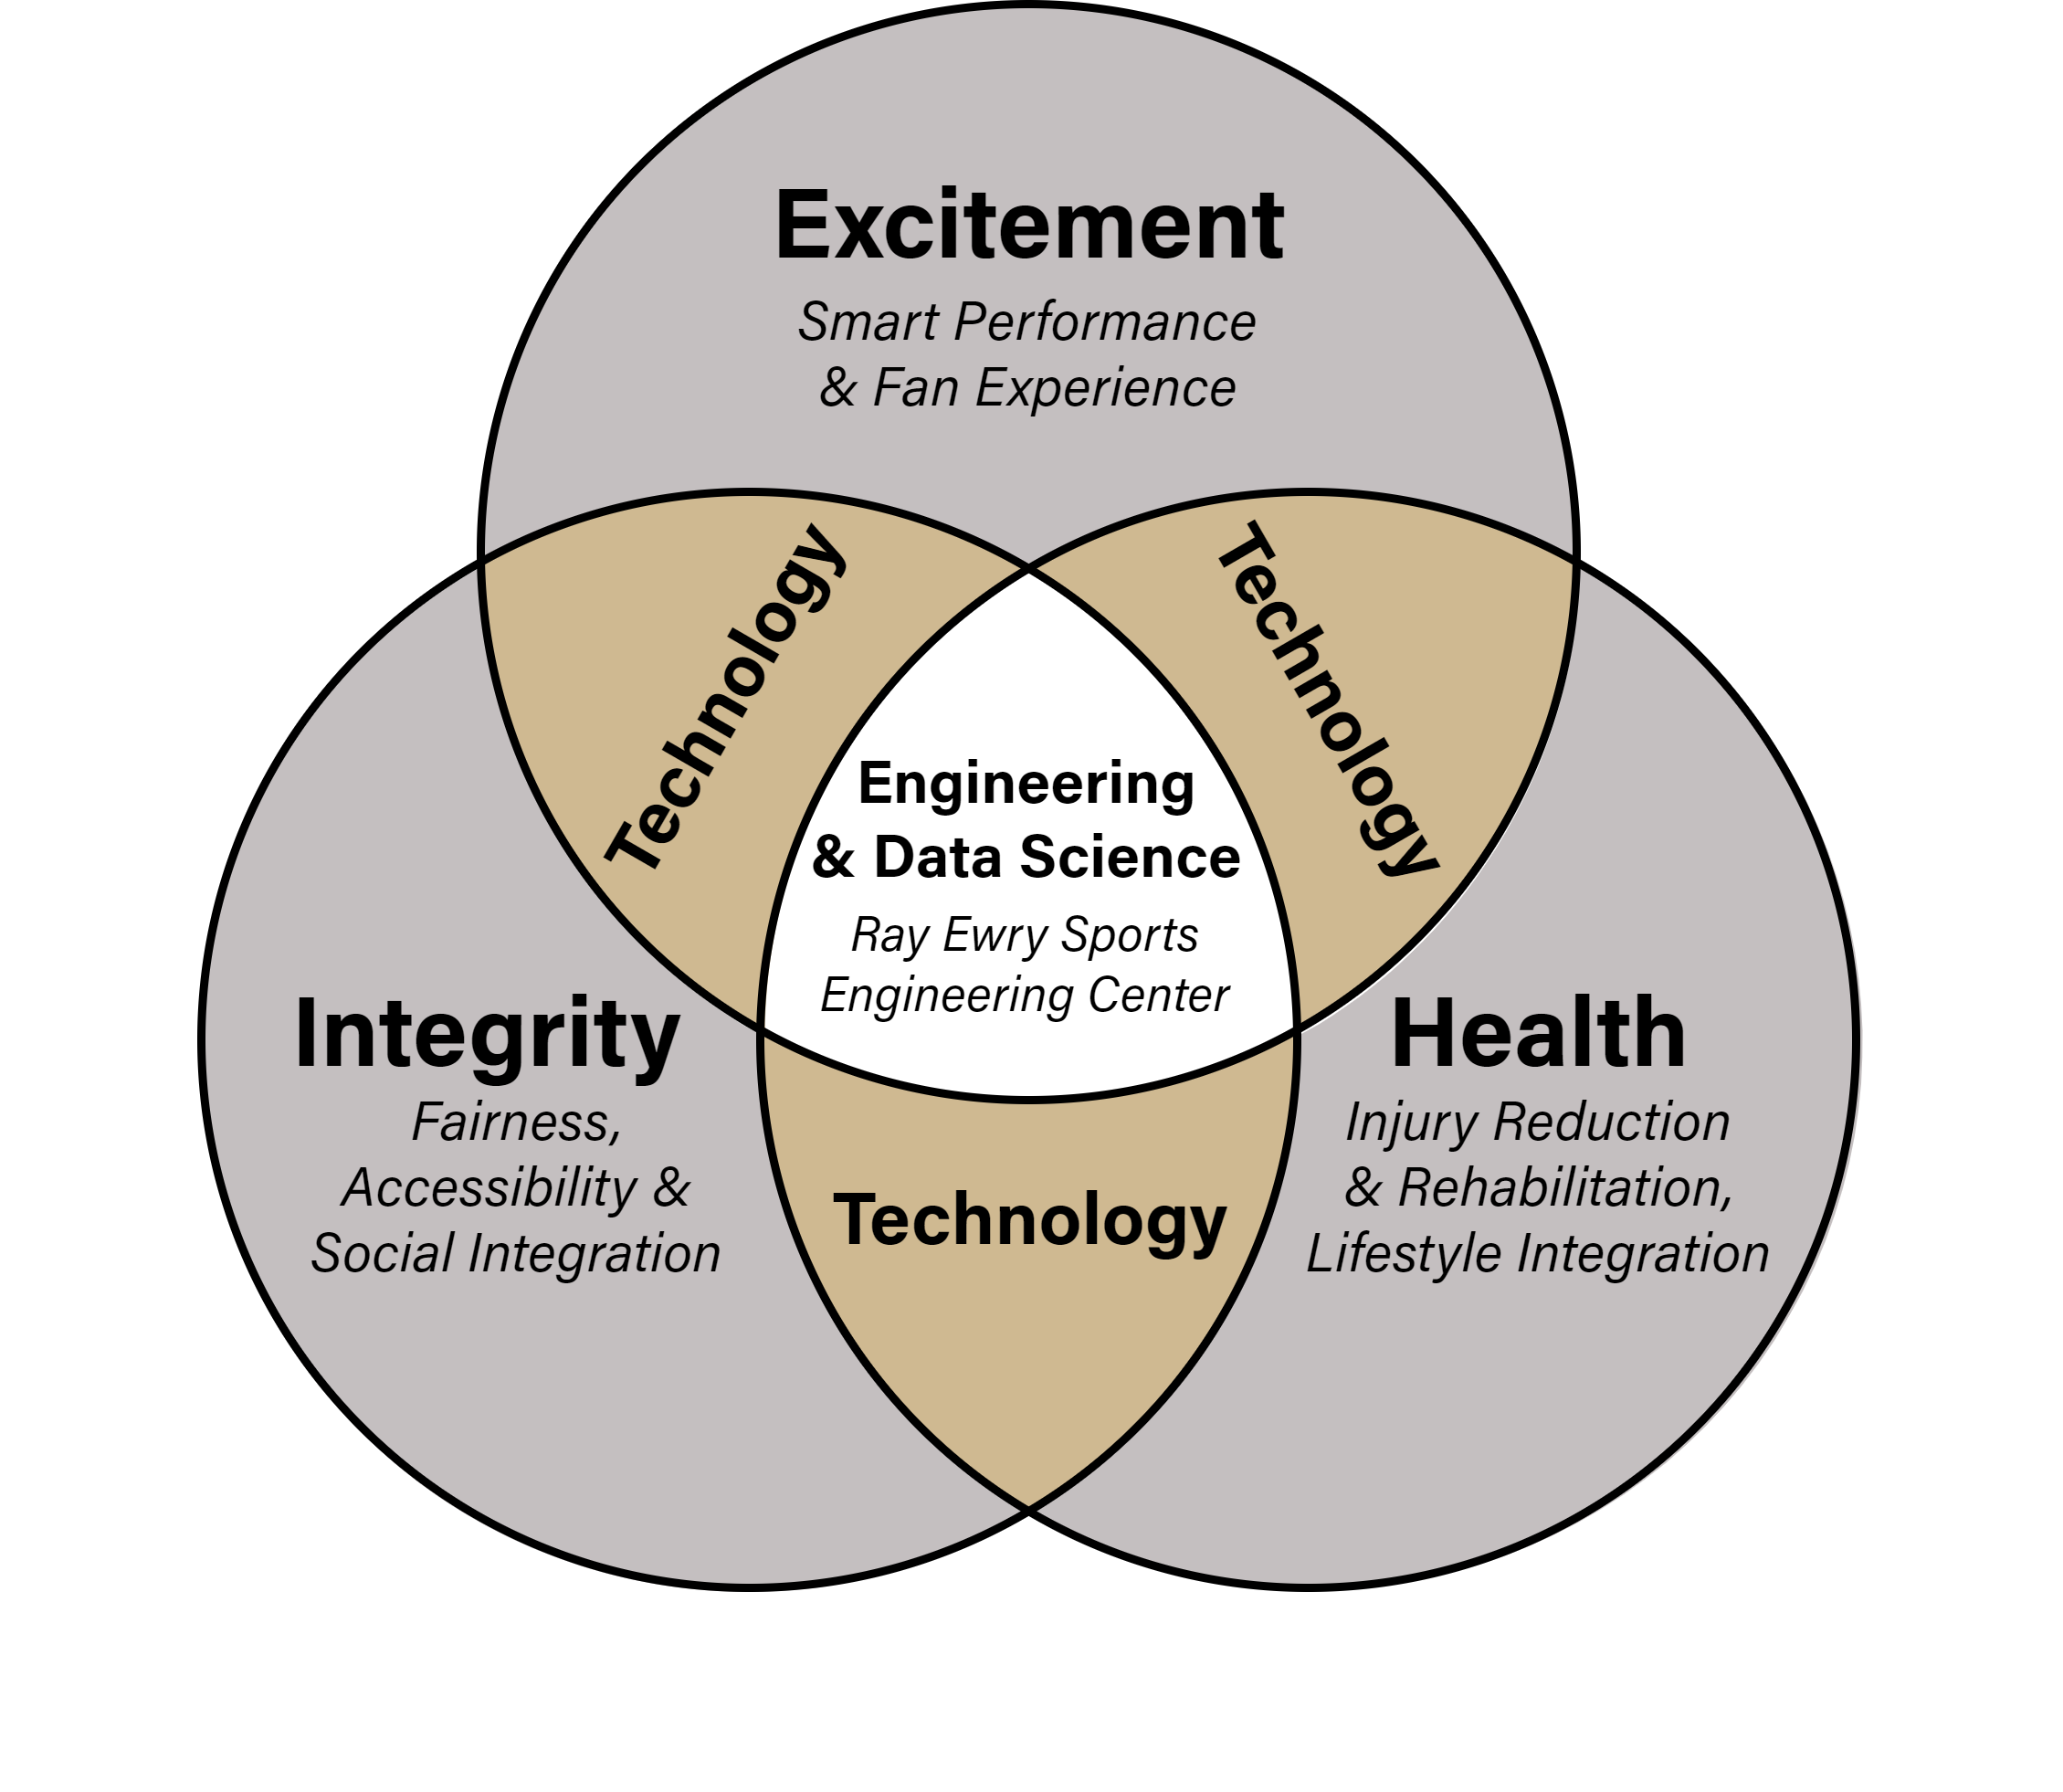 3-way venn diagram demonstrating that Excitement, Integrity, and Health in sports can all be influenced by technology. The Ray Ewry Sports Engineering Center positions itself at the intersection of all 3 concepts to use technology to advance our goals